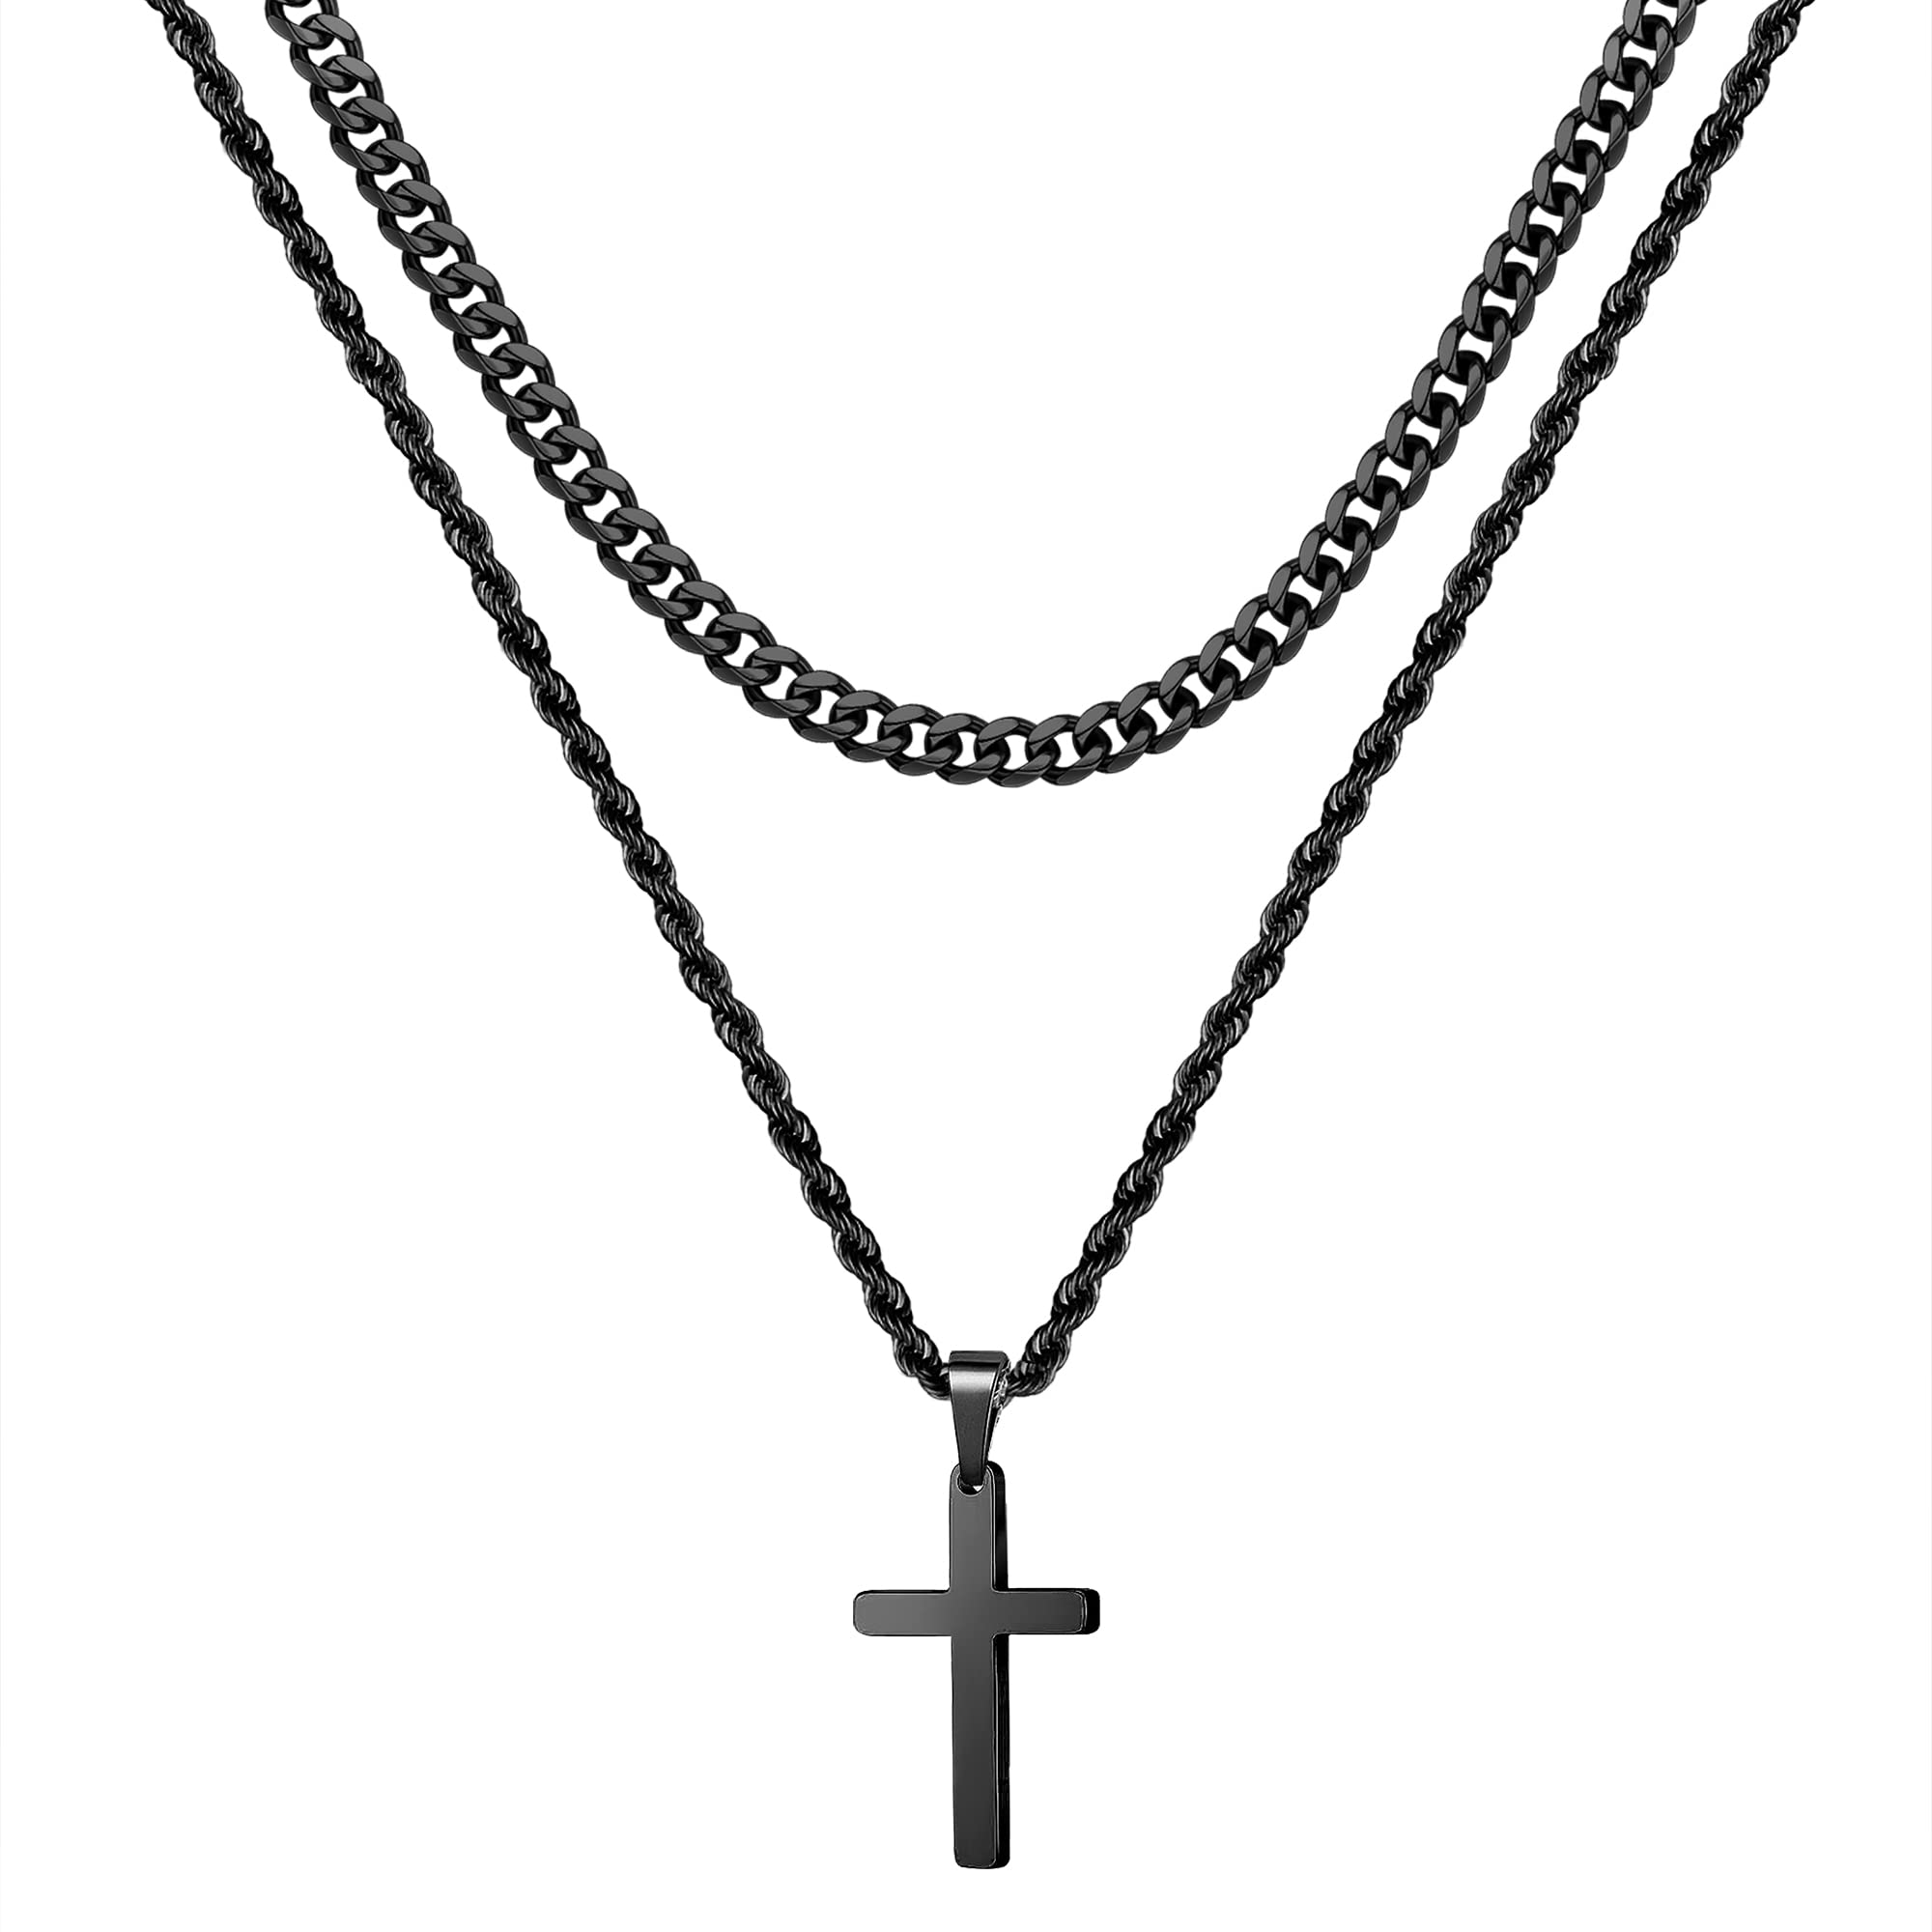 Yooblue Cross Necklace For Men Boys, Mens Cross Necklace Stainless Steel Black Layered Necklace Jewelry Gifts Dainty Cross Chain